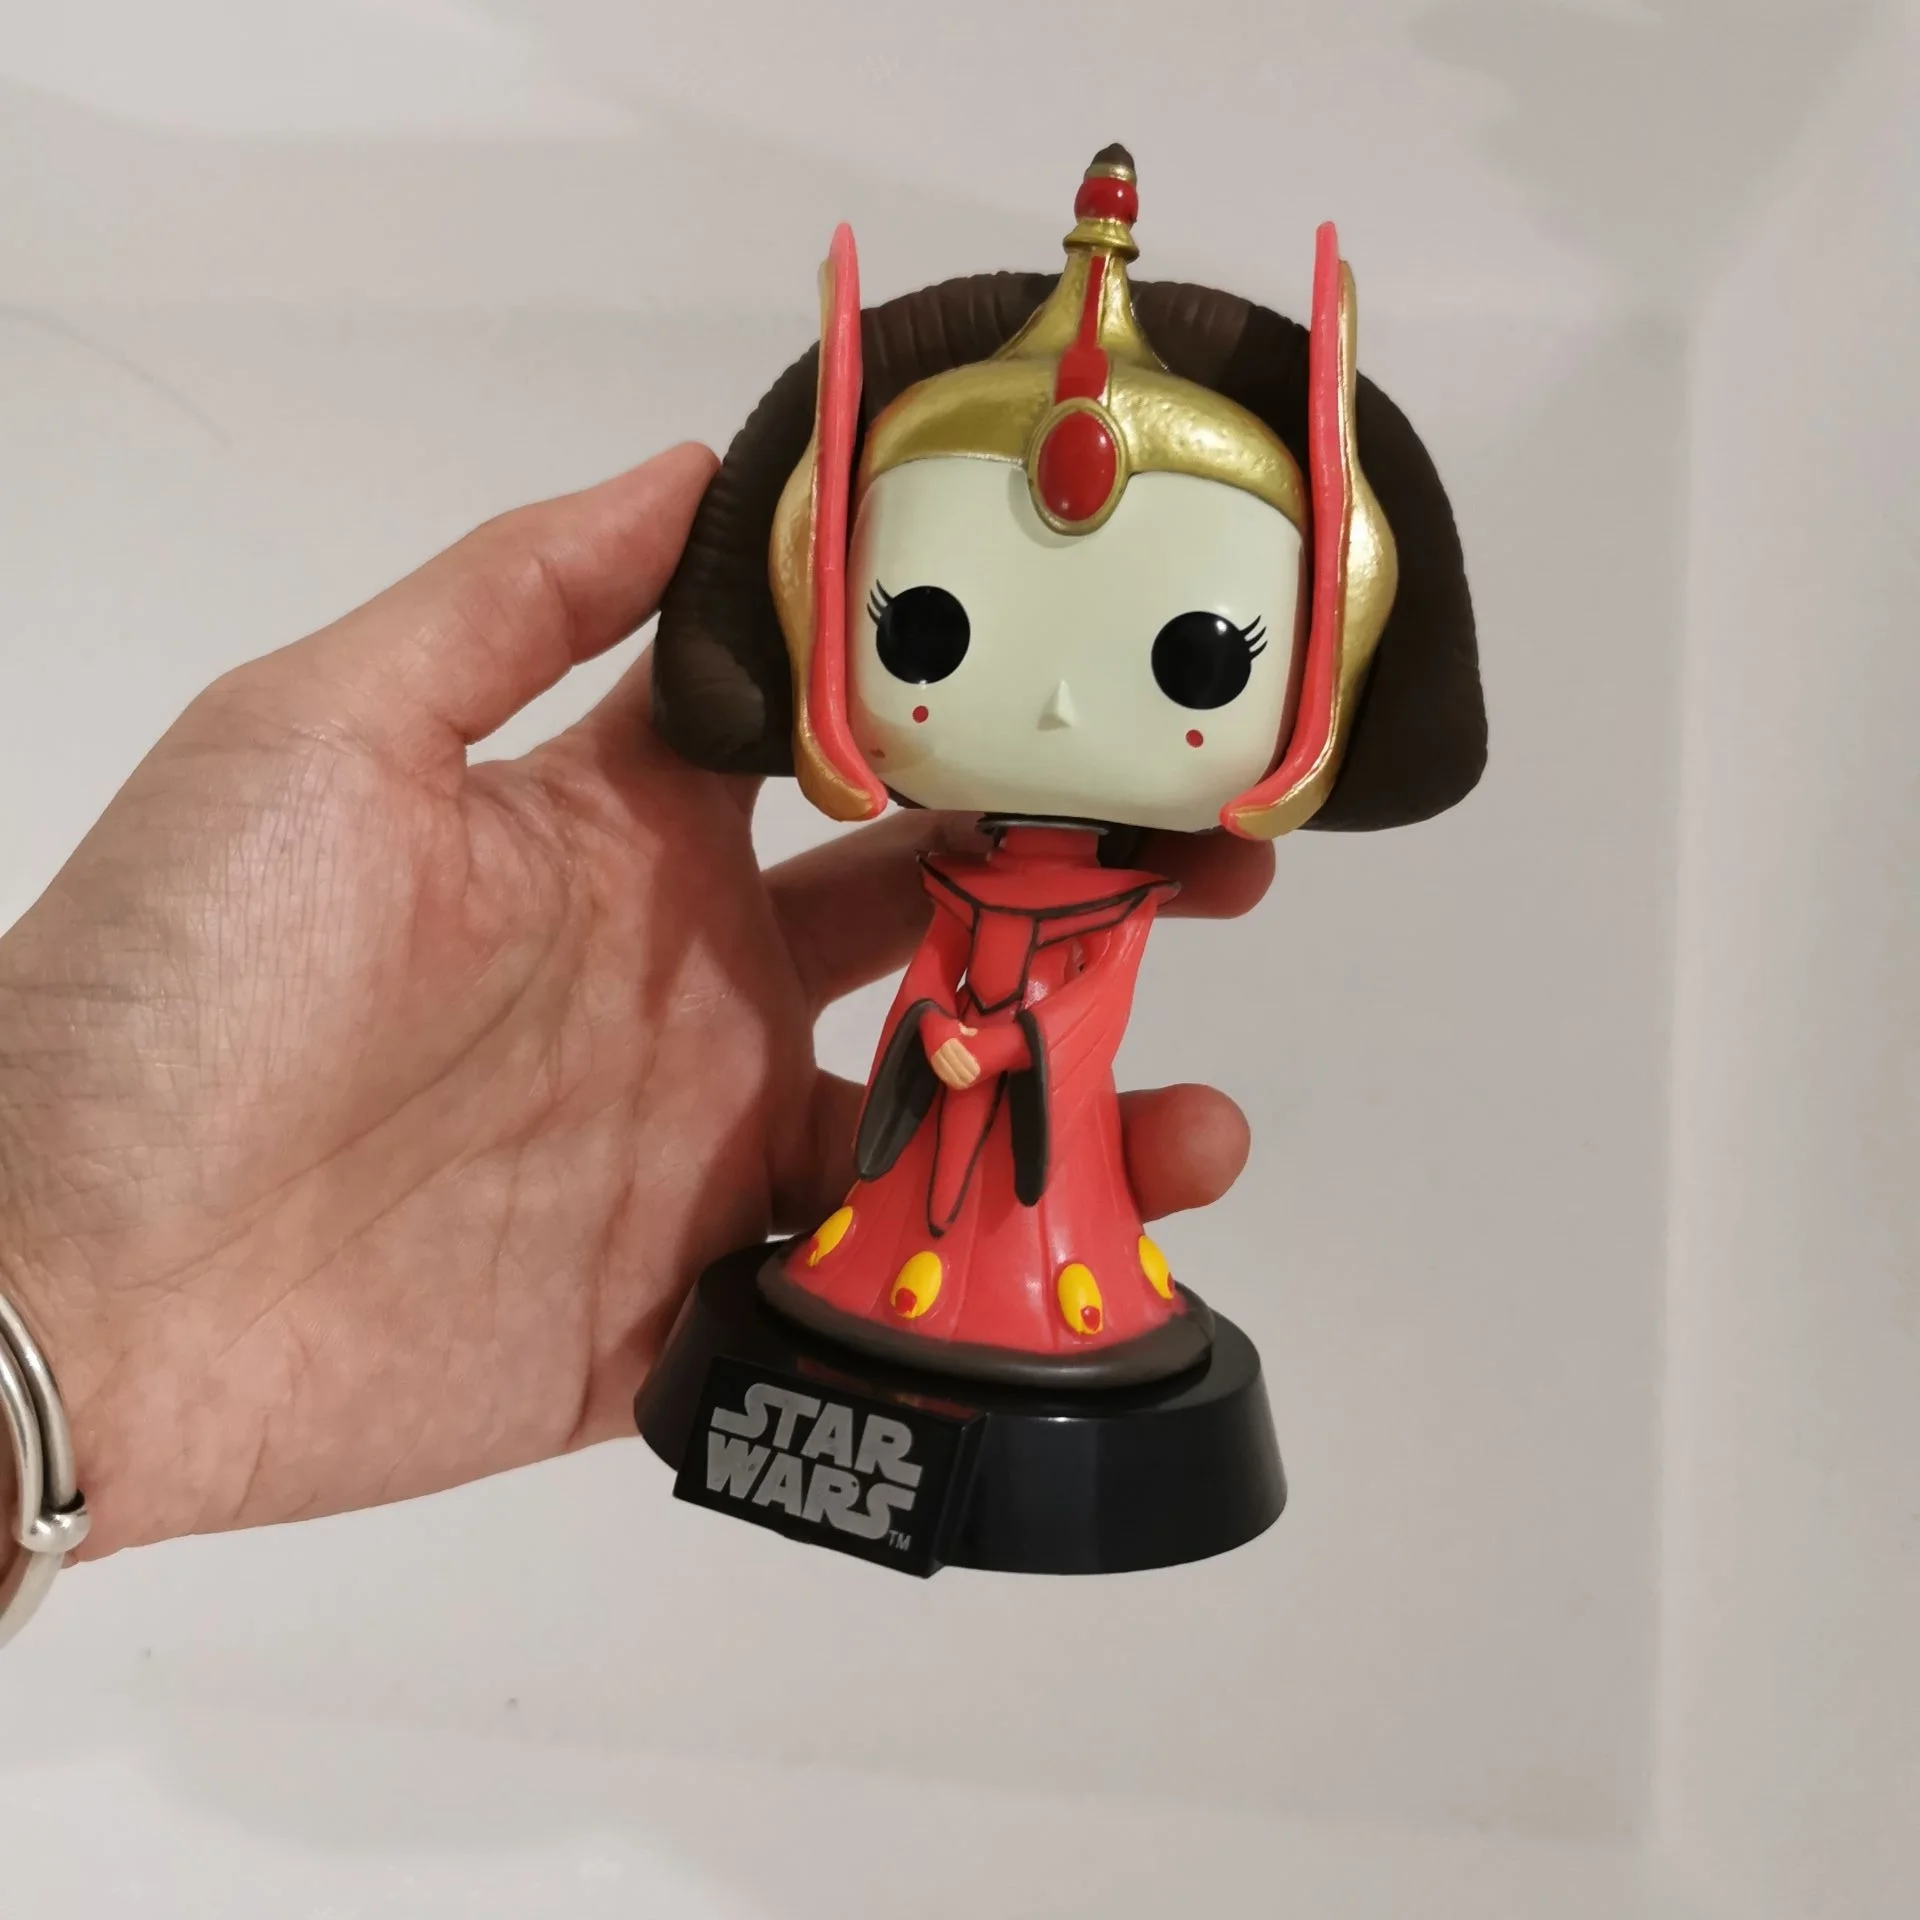 Funko Pop 29 Amidala Star-wars Model Toy Doll Gift Collection Action Figure Toys Kid Chidren Hot - Buy Funko Queen Amidala,Funko Pop Star-wars,Star-wars Toy Doll Product on Alibaba.com